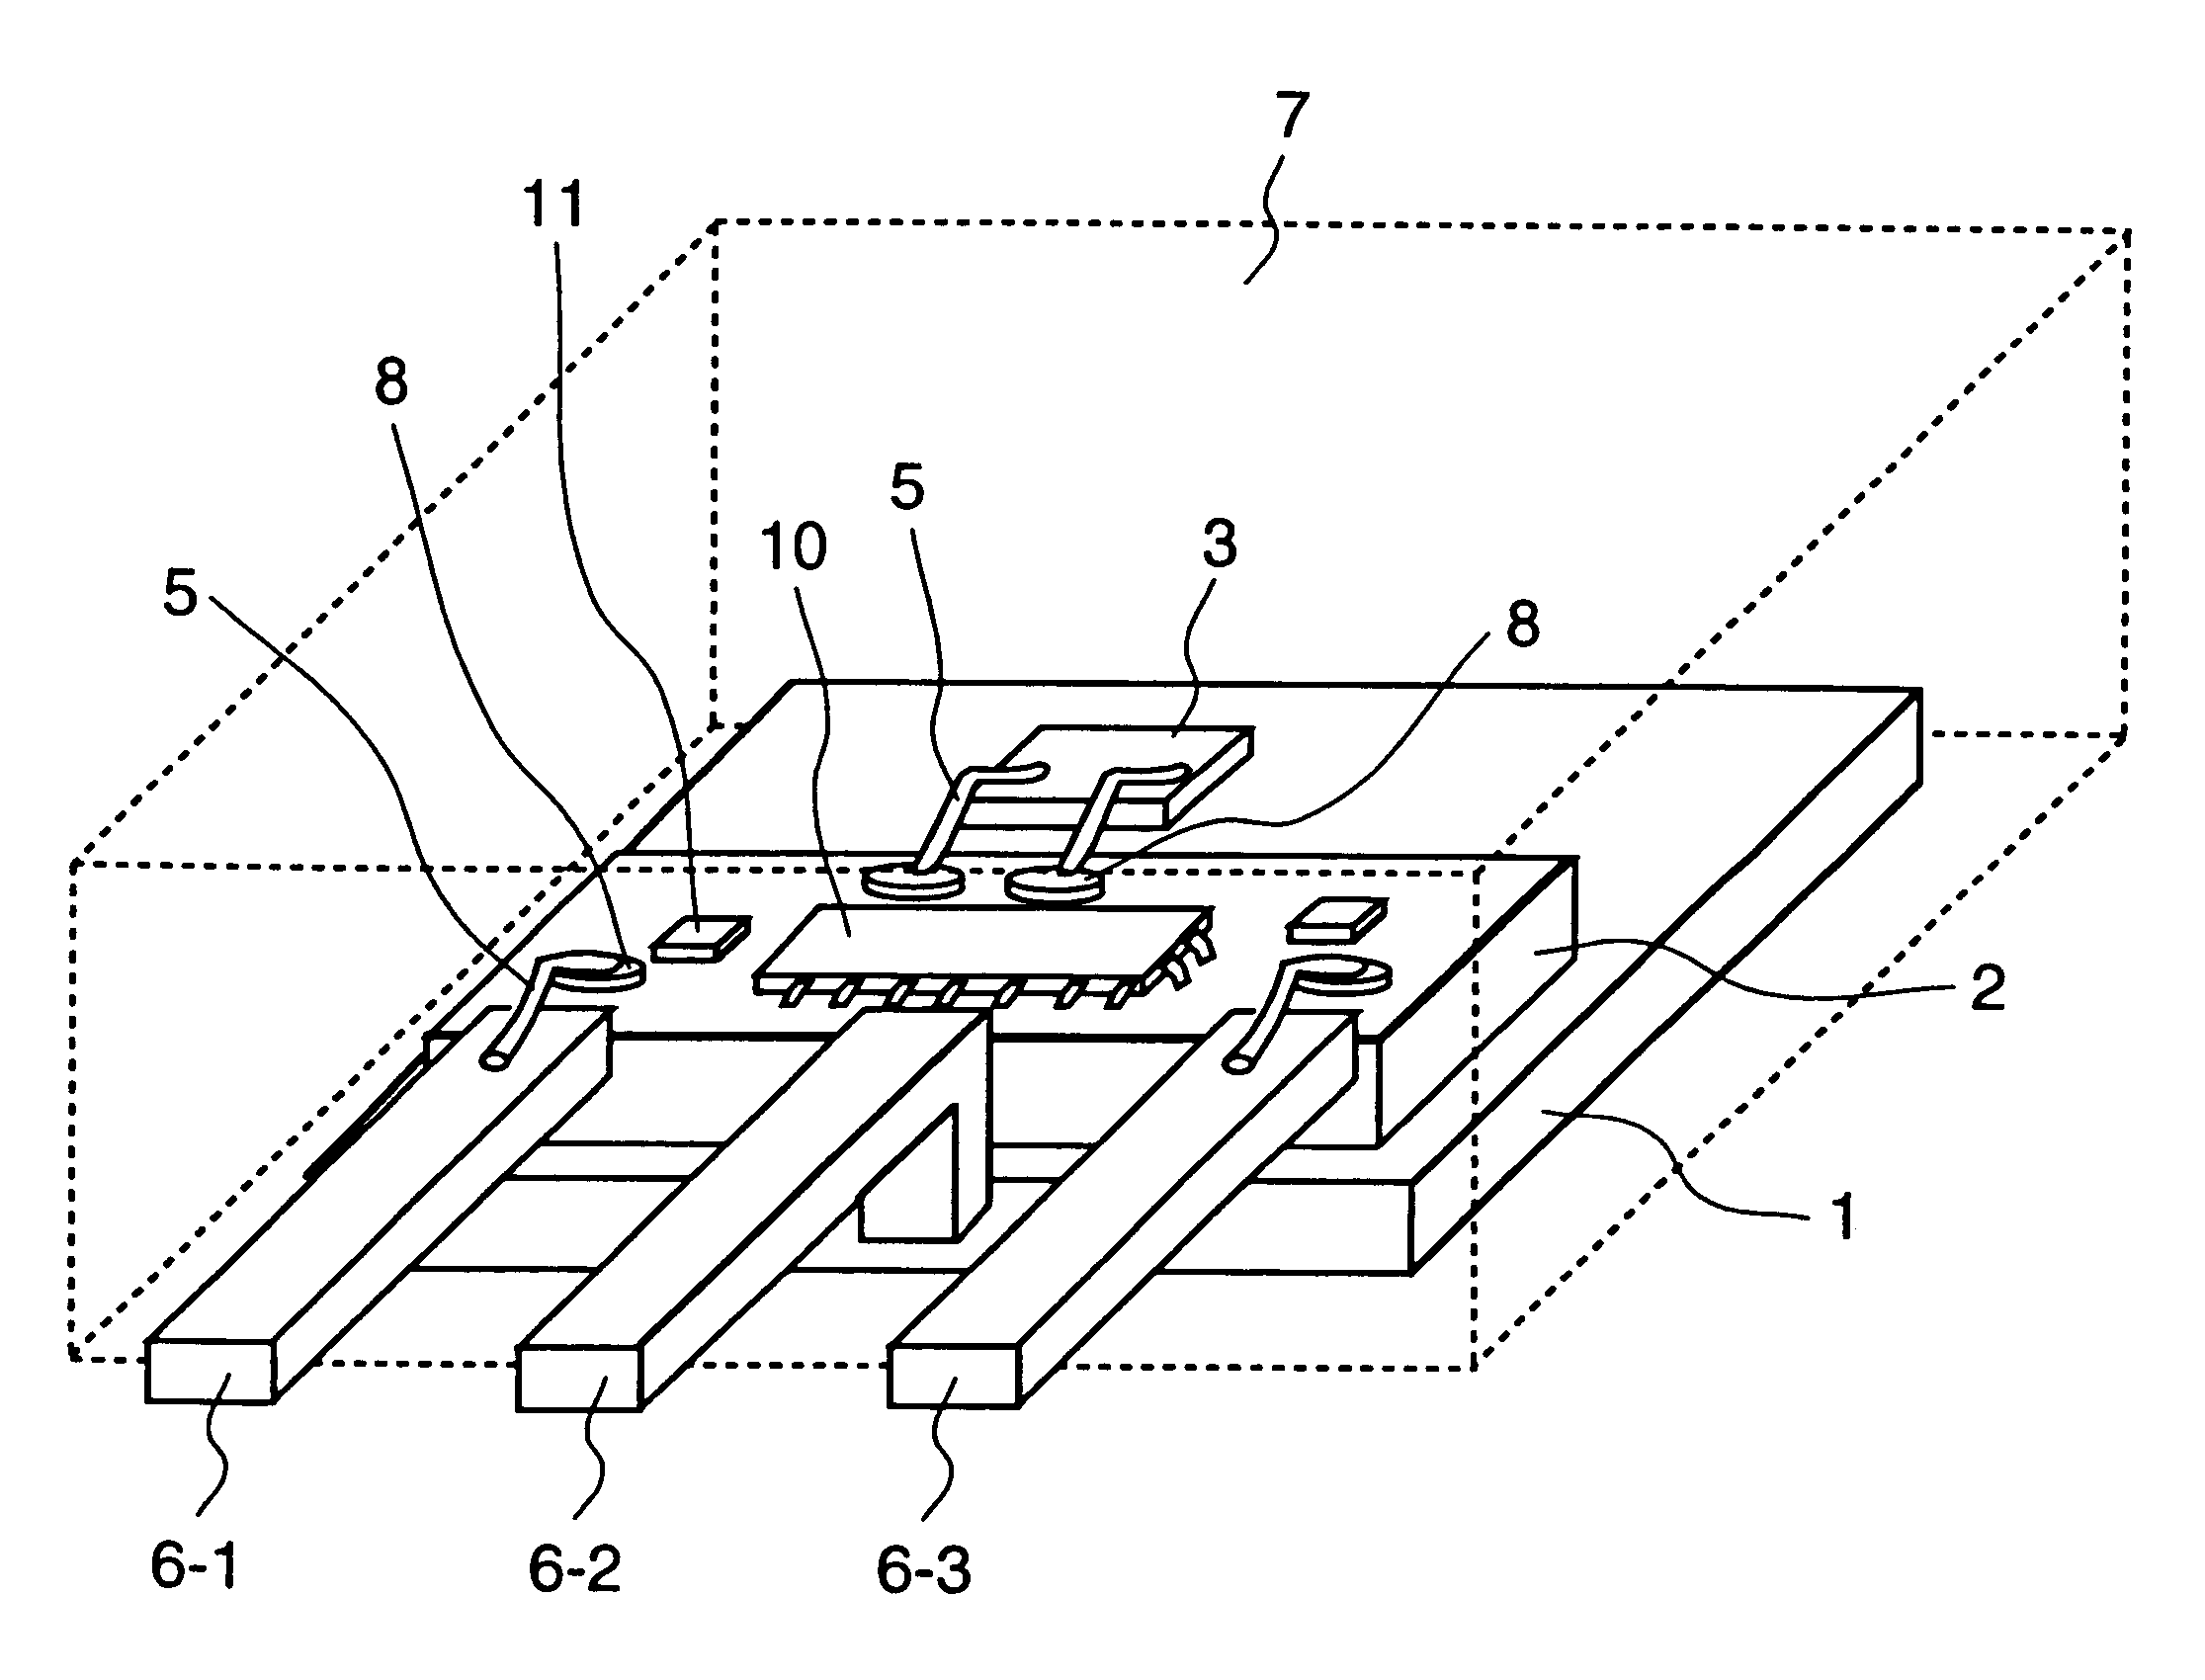 Resin-sealed electronic apparatus for use in internal combustion engines